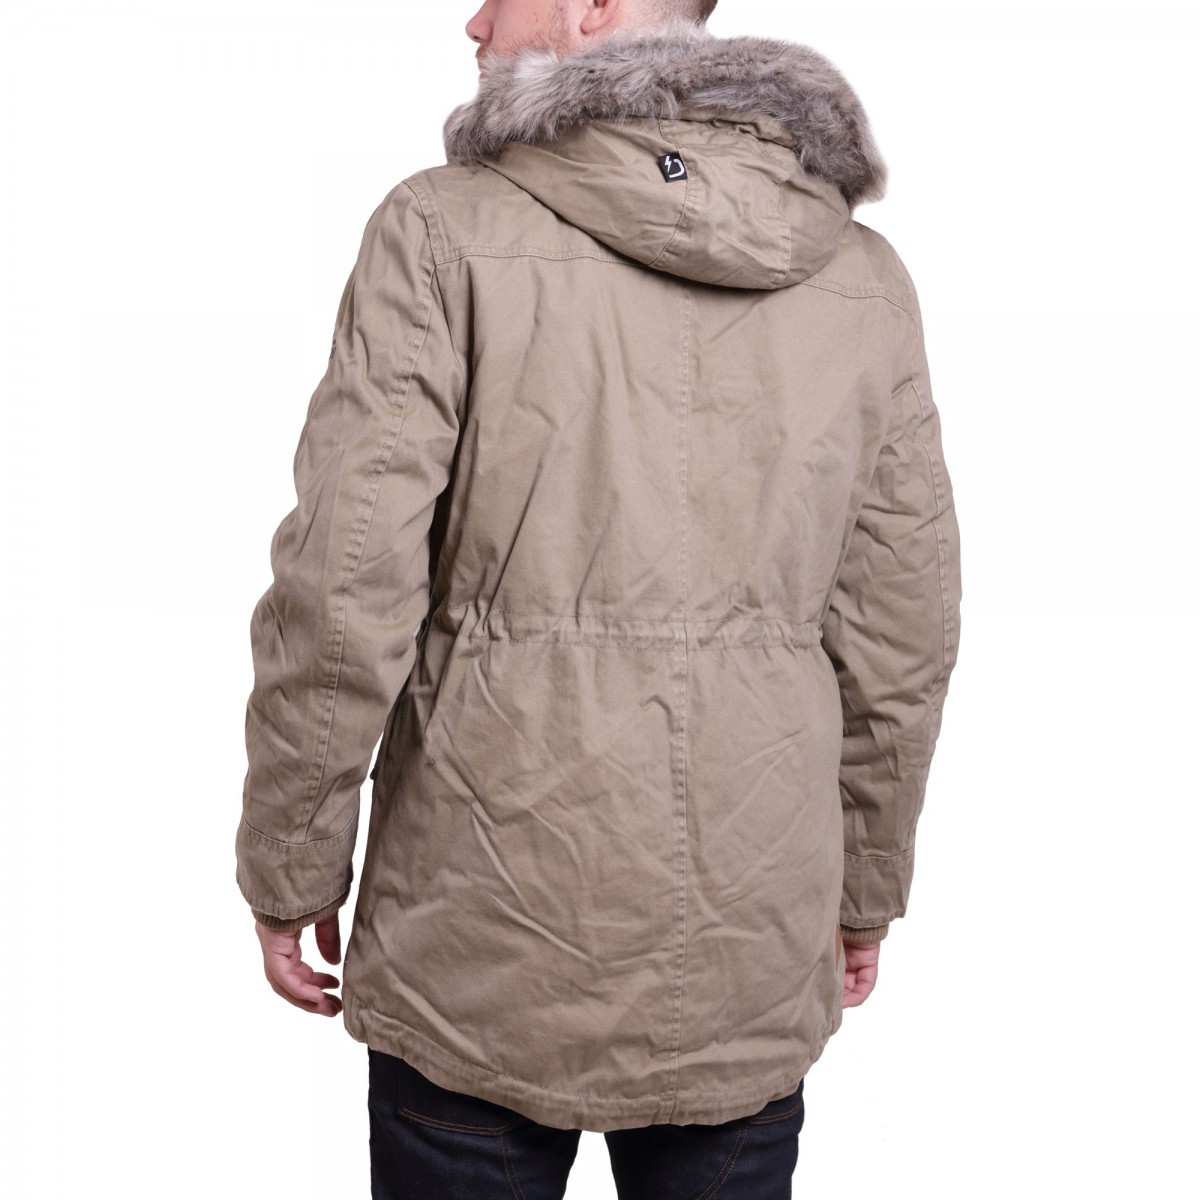 MENS LONG JACKET HOODED WITH FAKE FUR